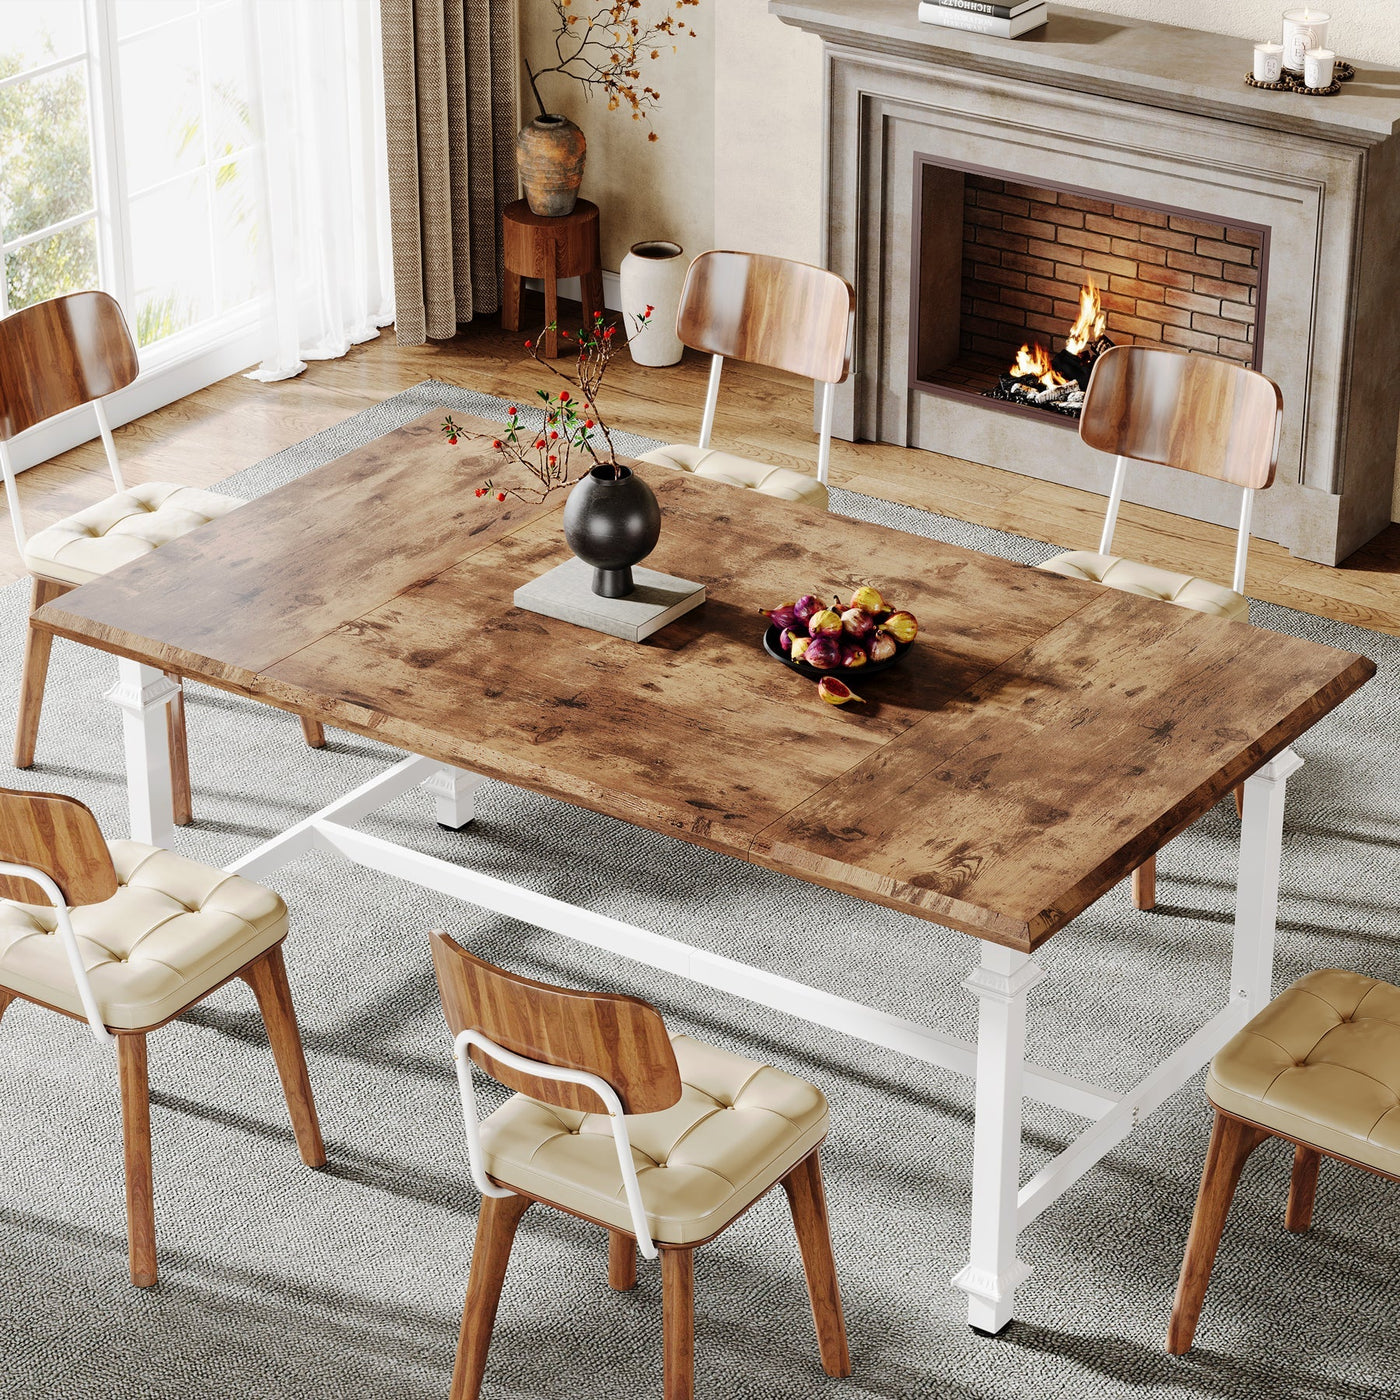 Bertene Wooden Dining Table, White Brown Wood Farmhouse Kitchen Table for 6